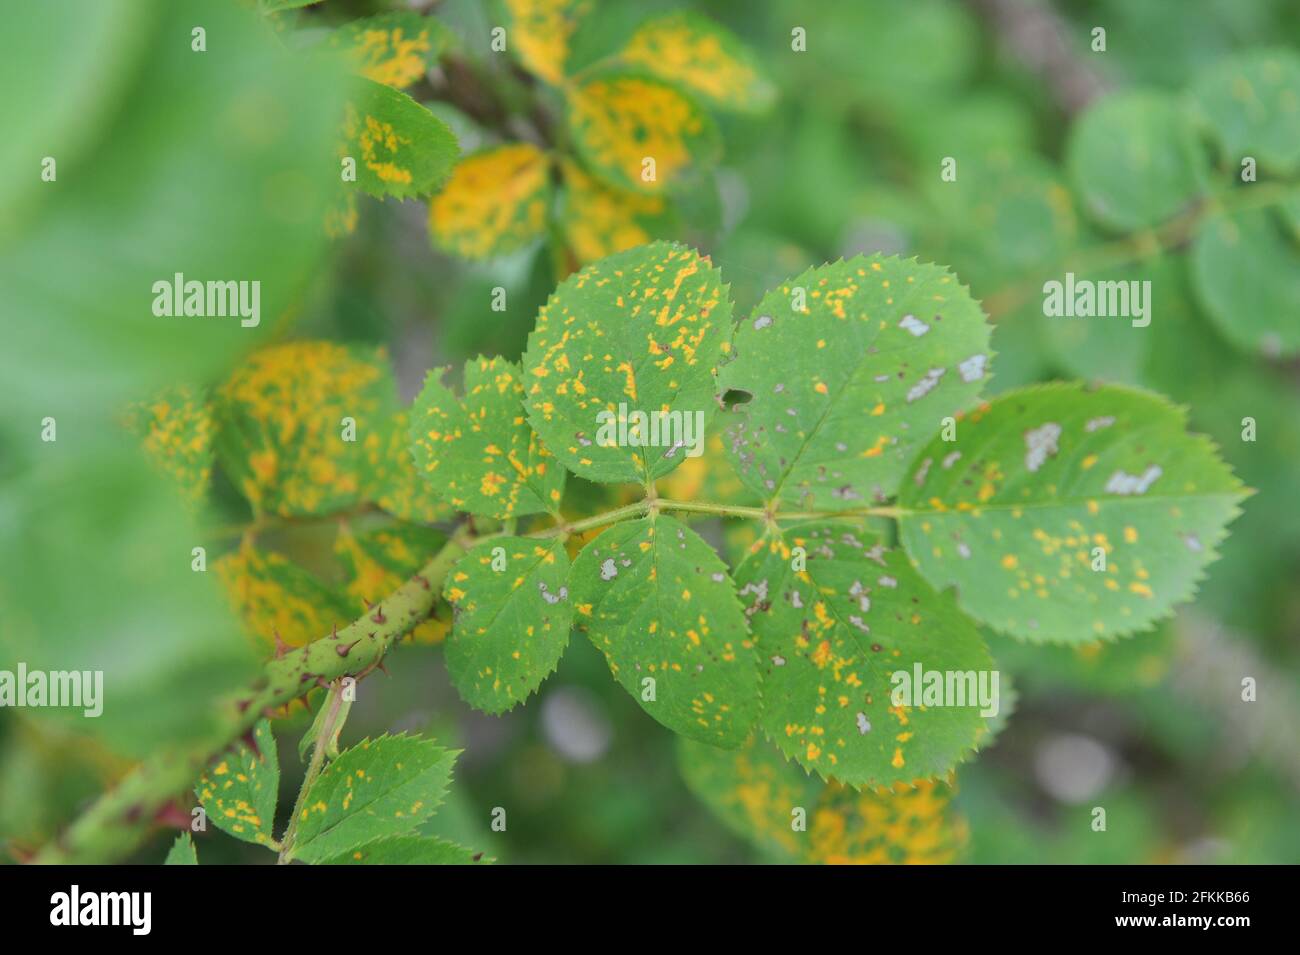 Rust disease on the leaves of a Hybrid Rugosa rose (Rosa) Conrad Ferdinand Meyer in a garden in July Stock Photo